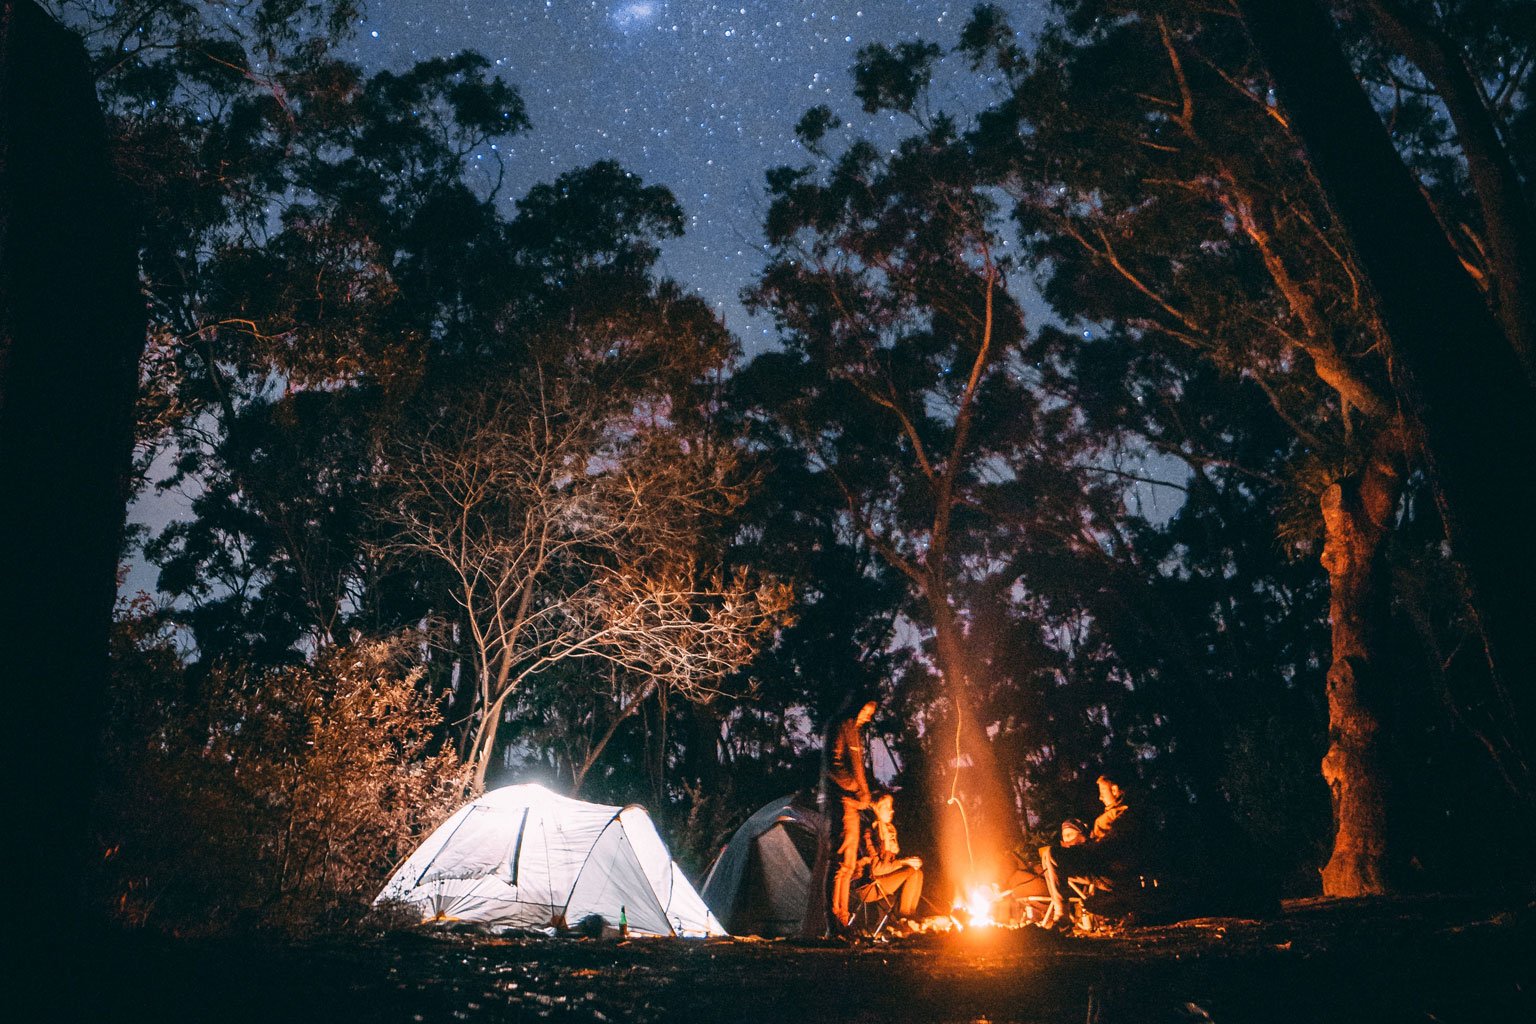 Can you buy everything you need for an overnight camping trip at